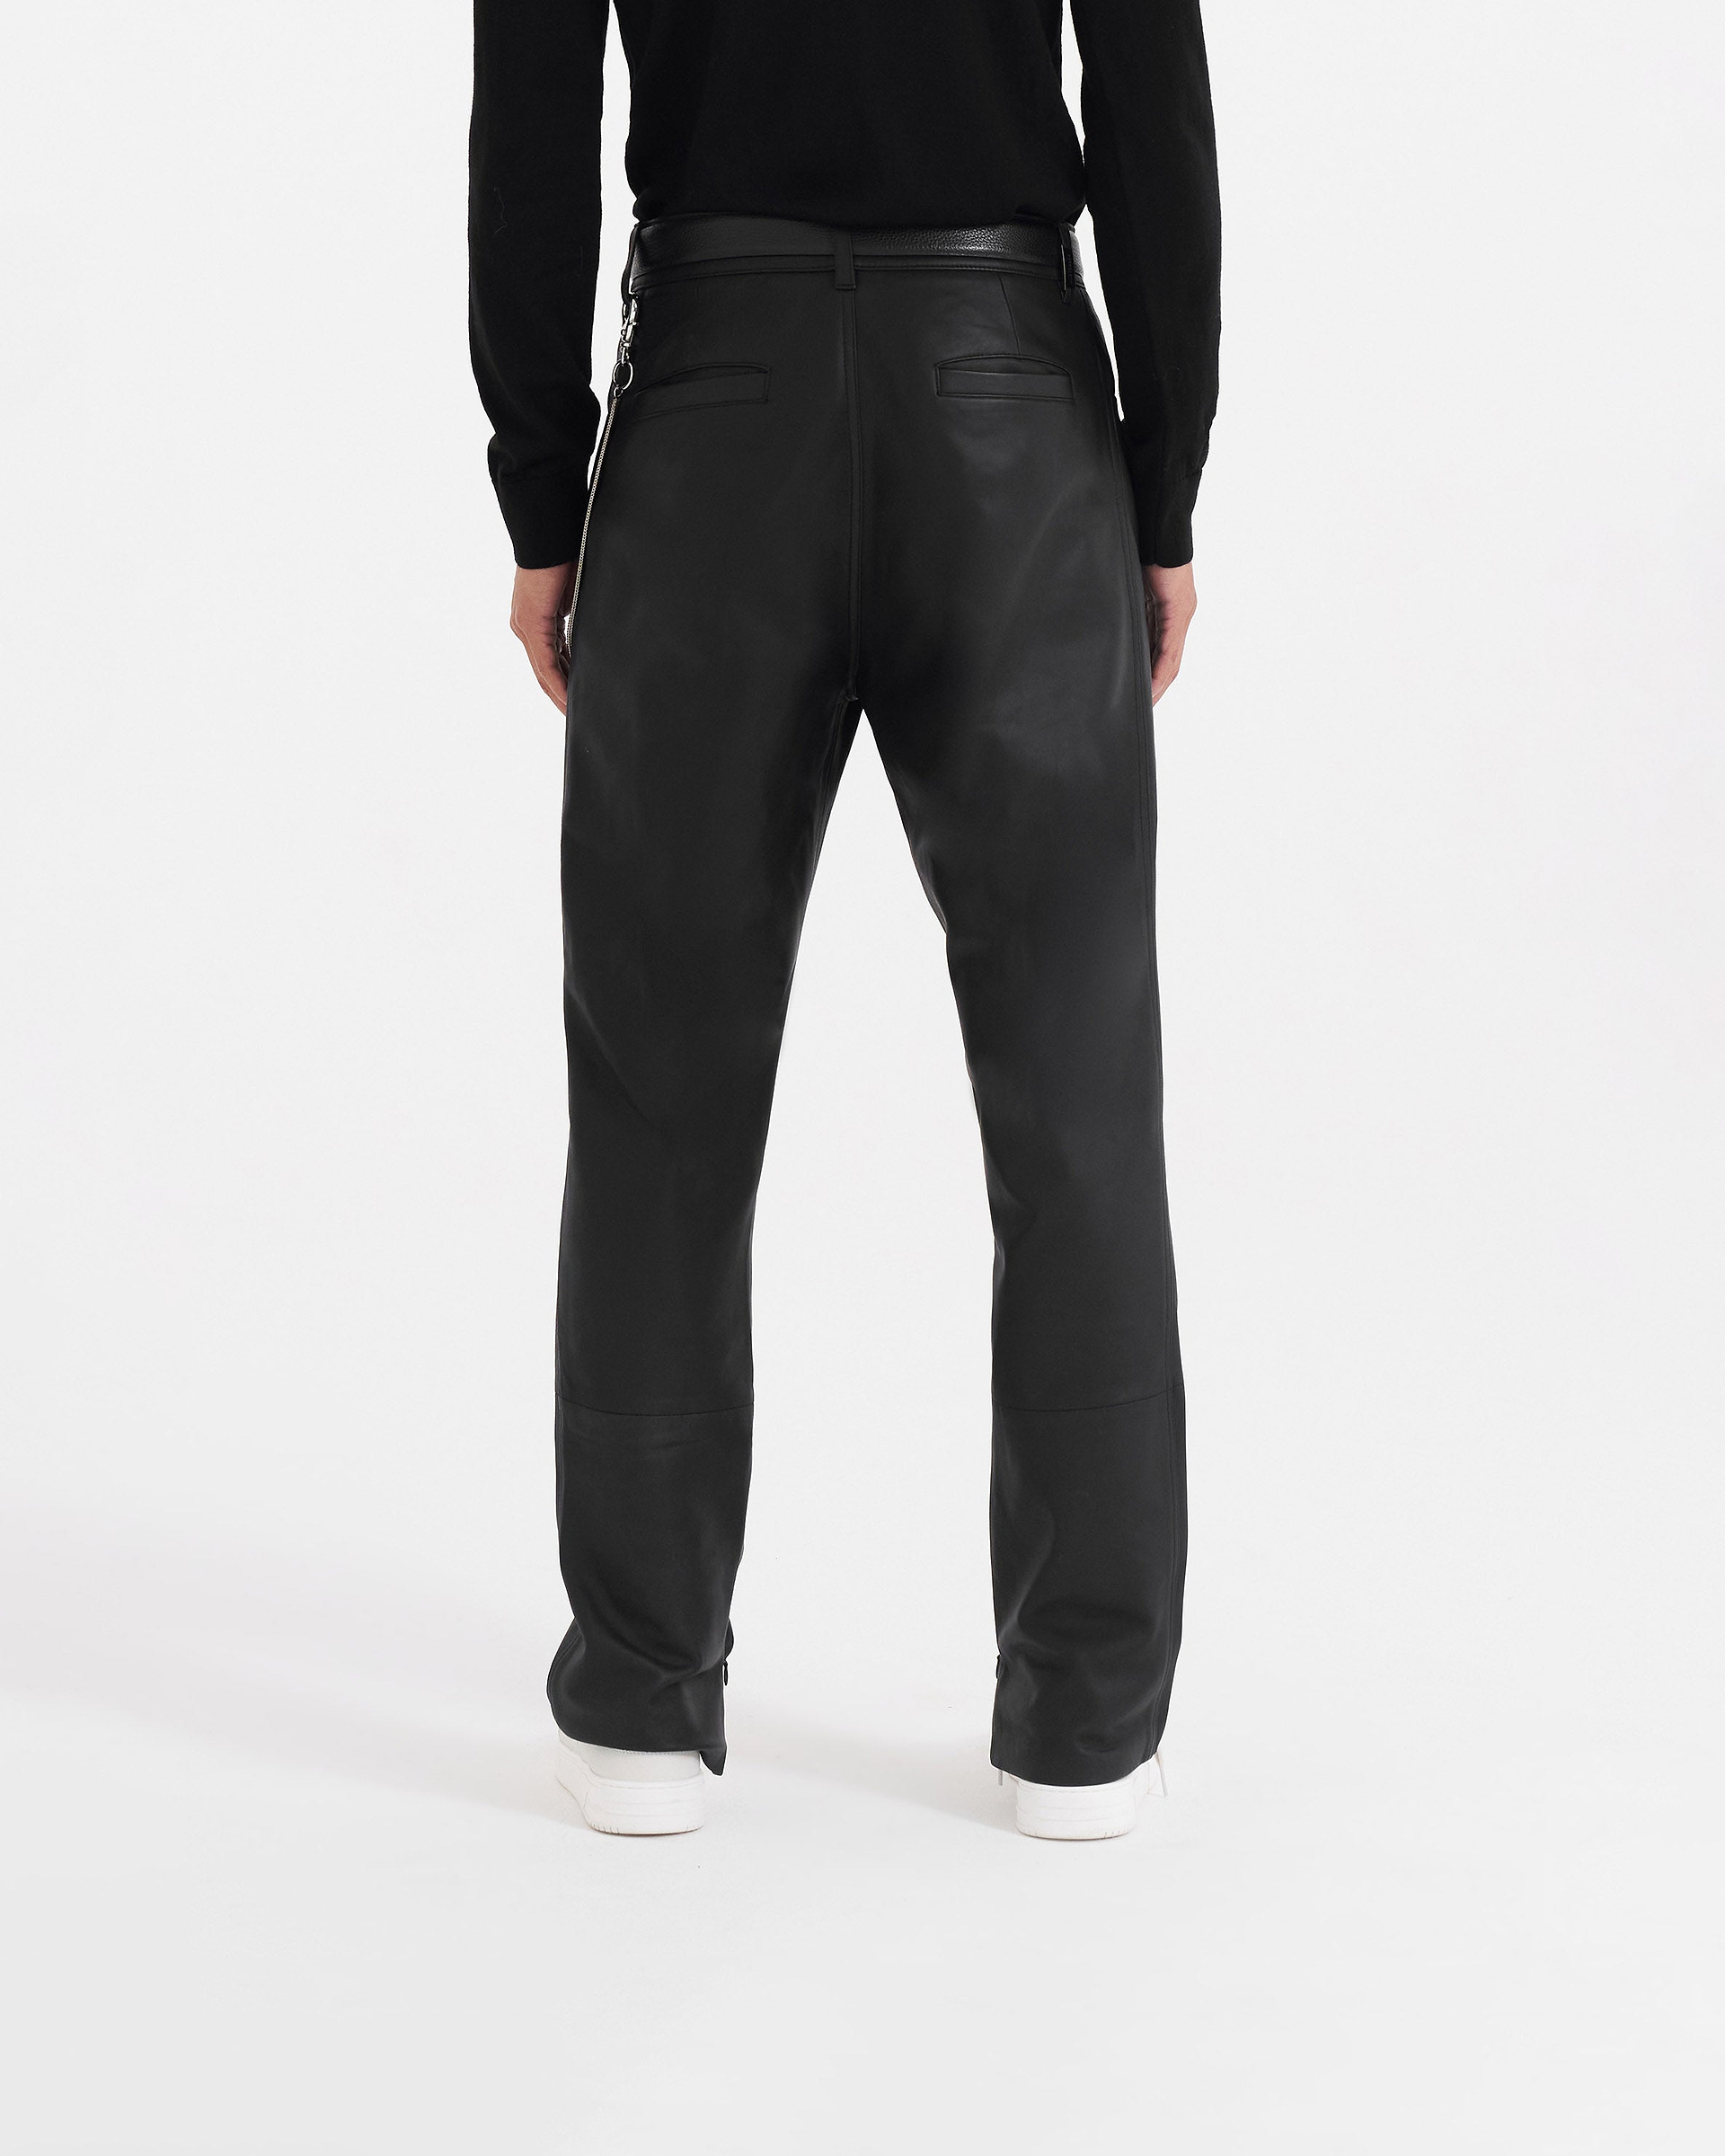 Leather Tailored Pant - Black